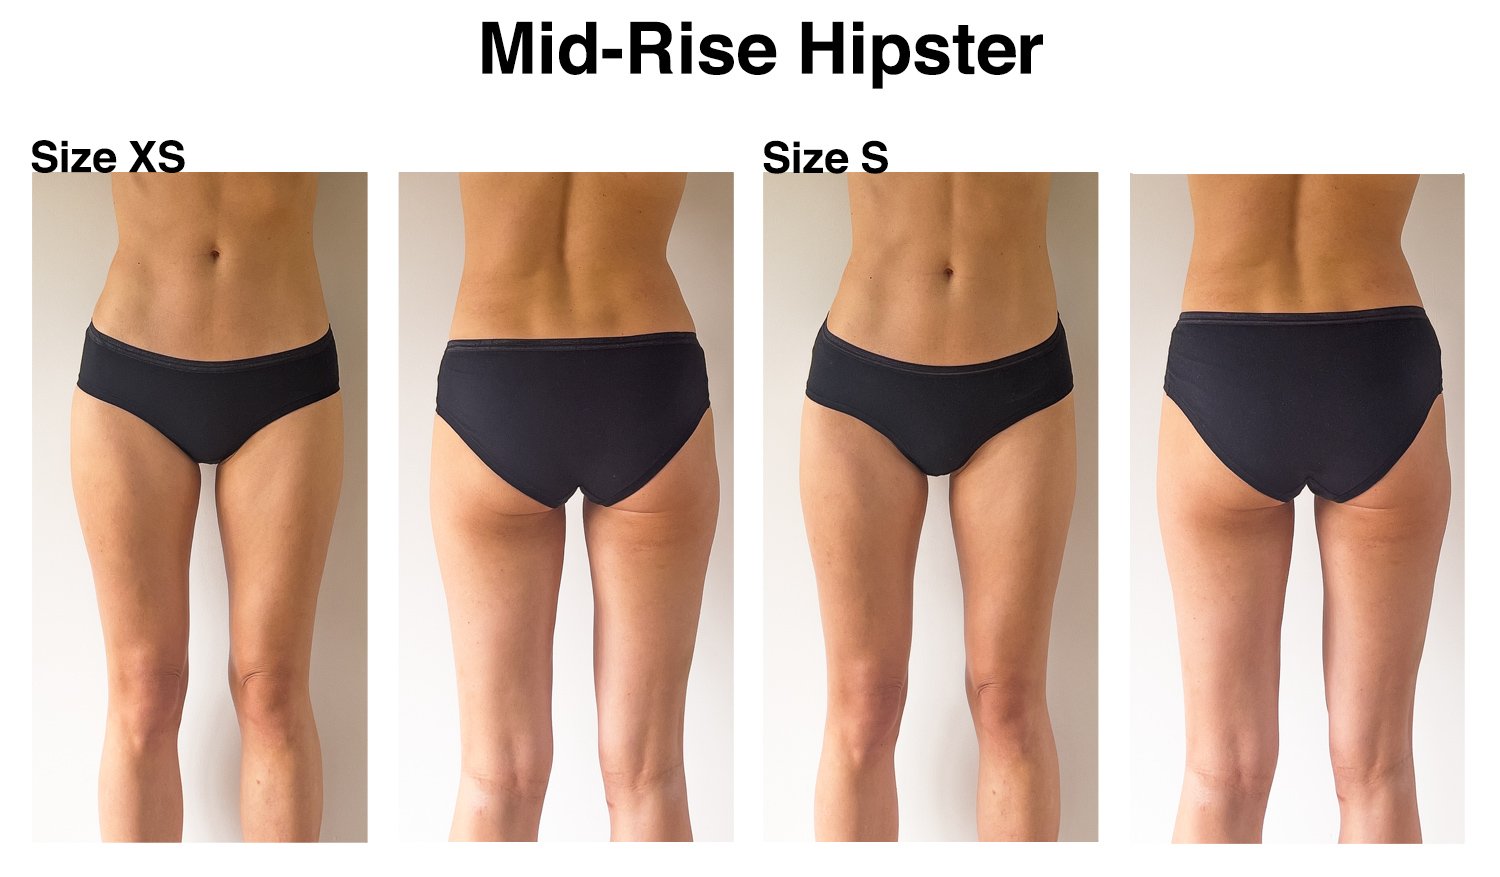 Knickey mid-rise hipster sizing